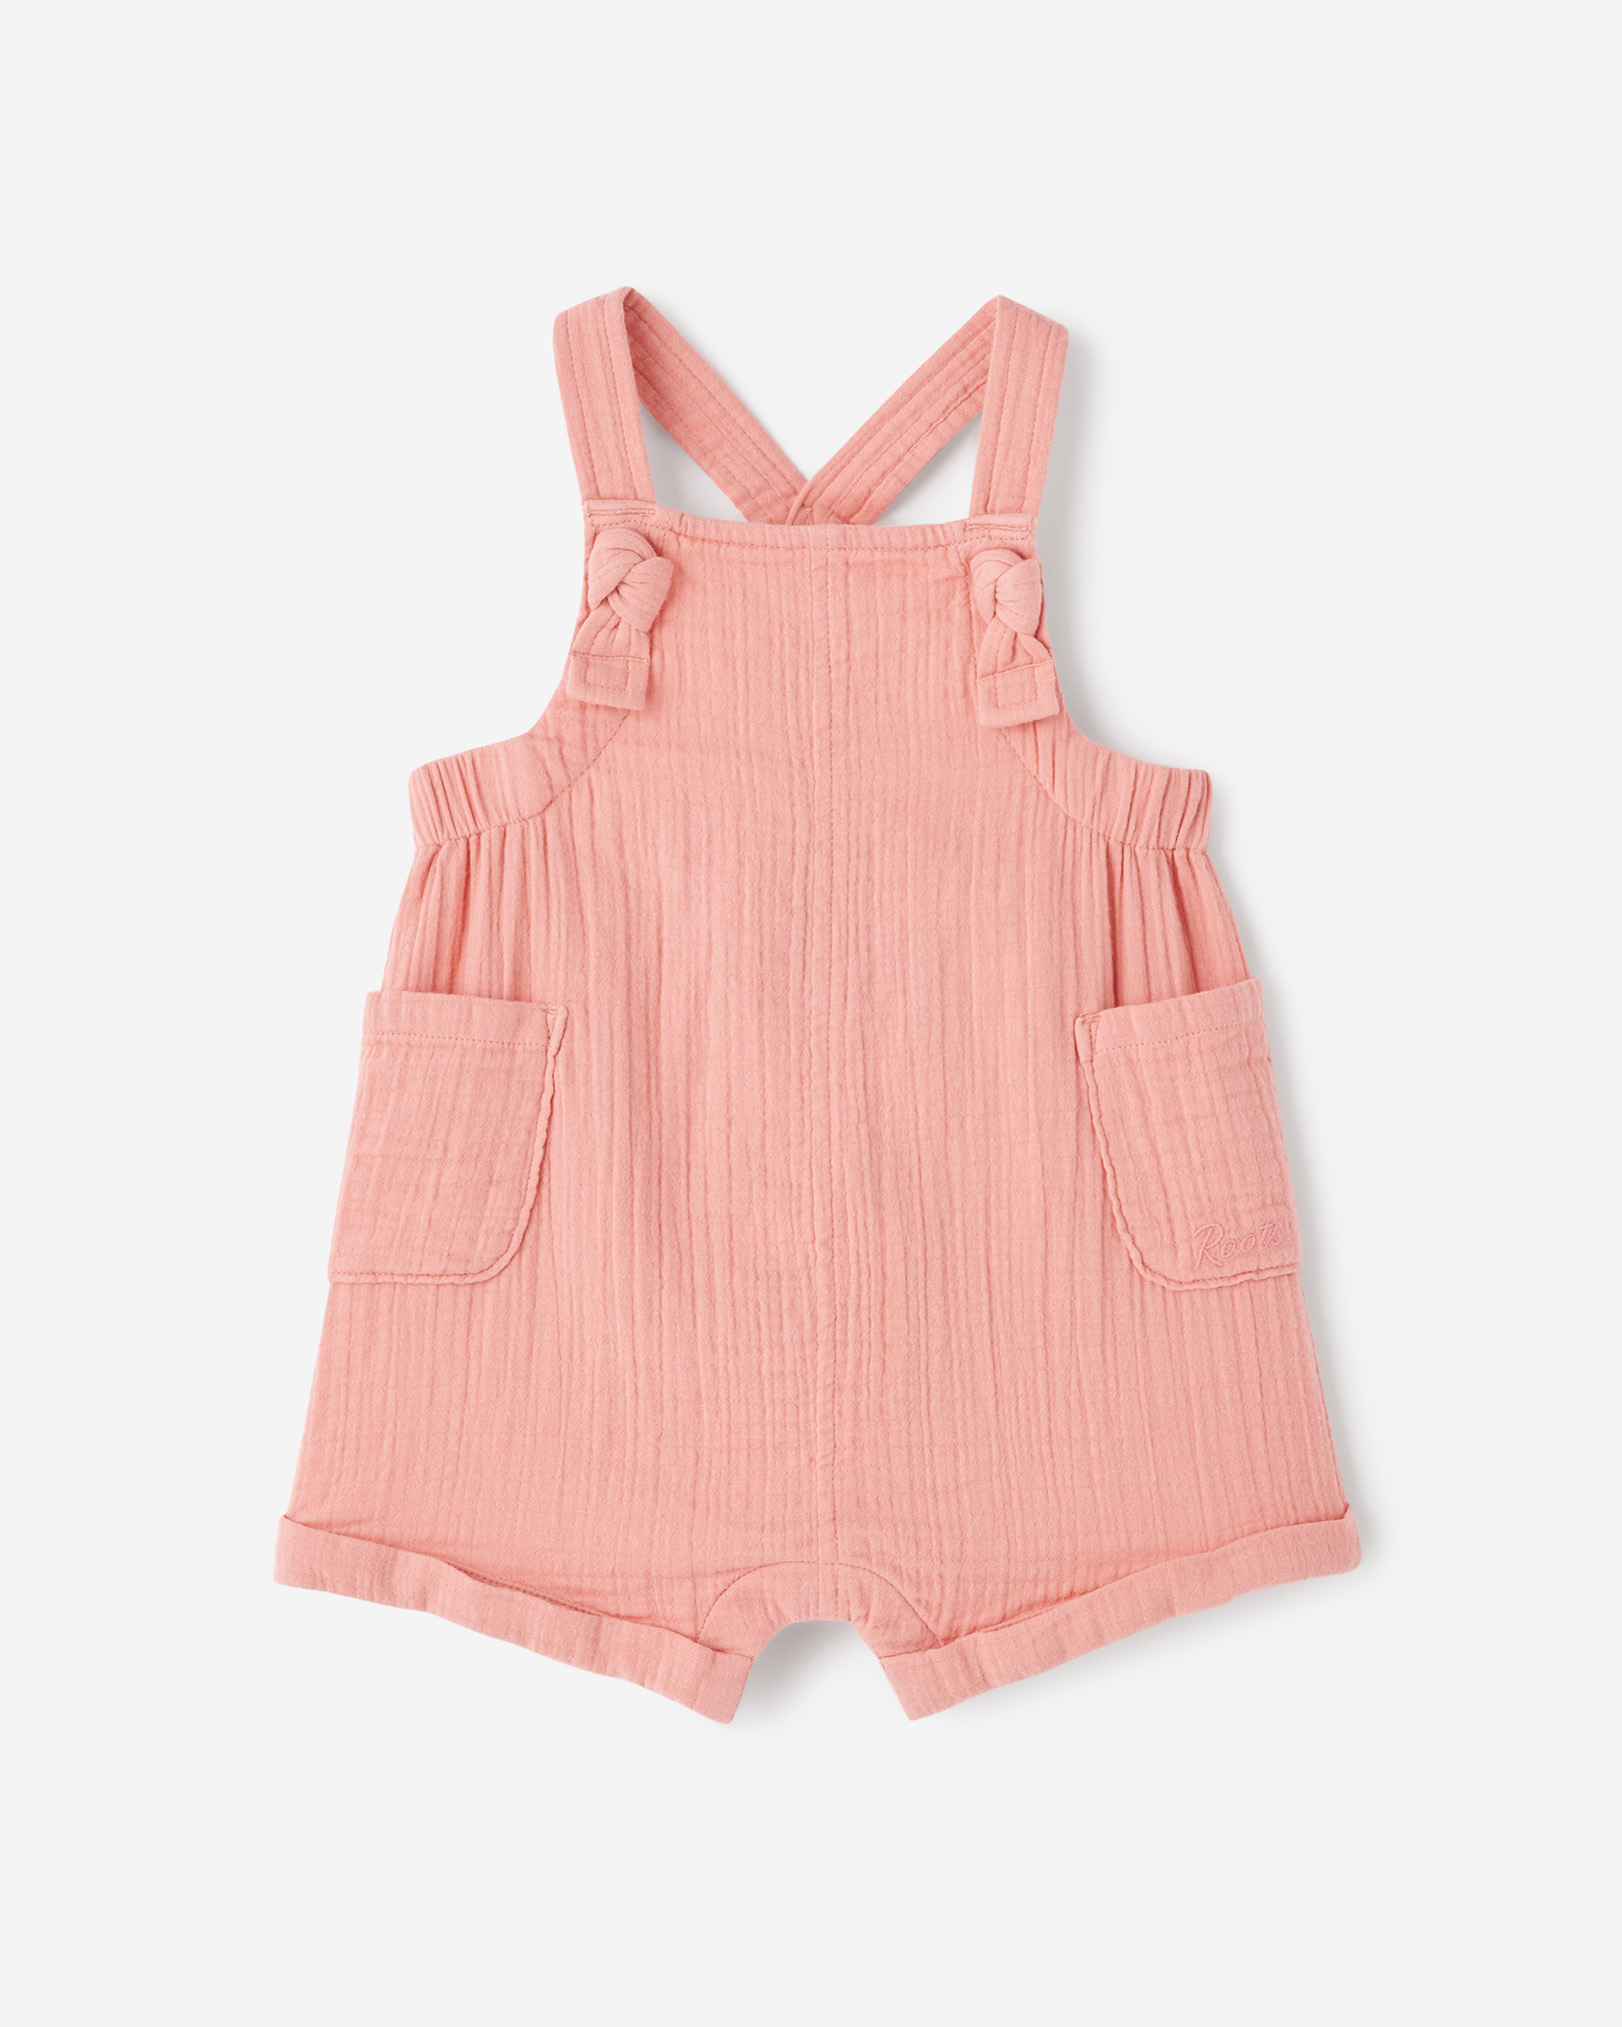 Roots Baby Crinkle Overall in Mauveglow